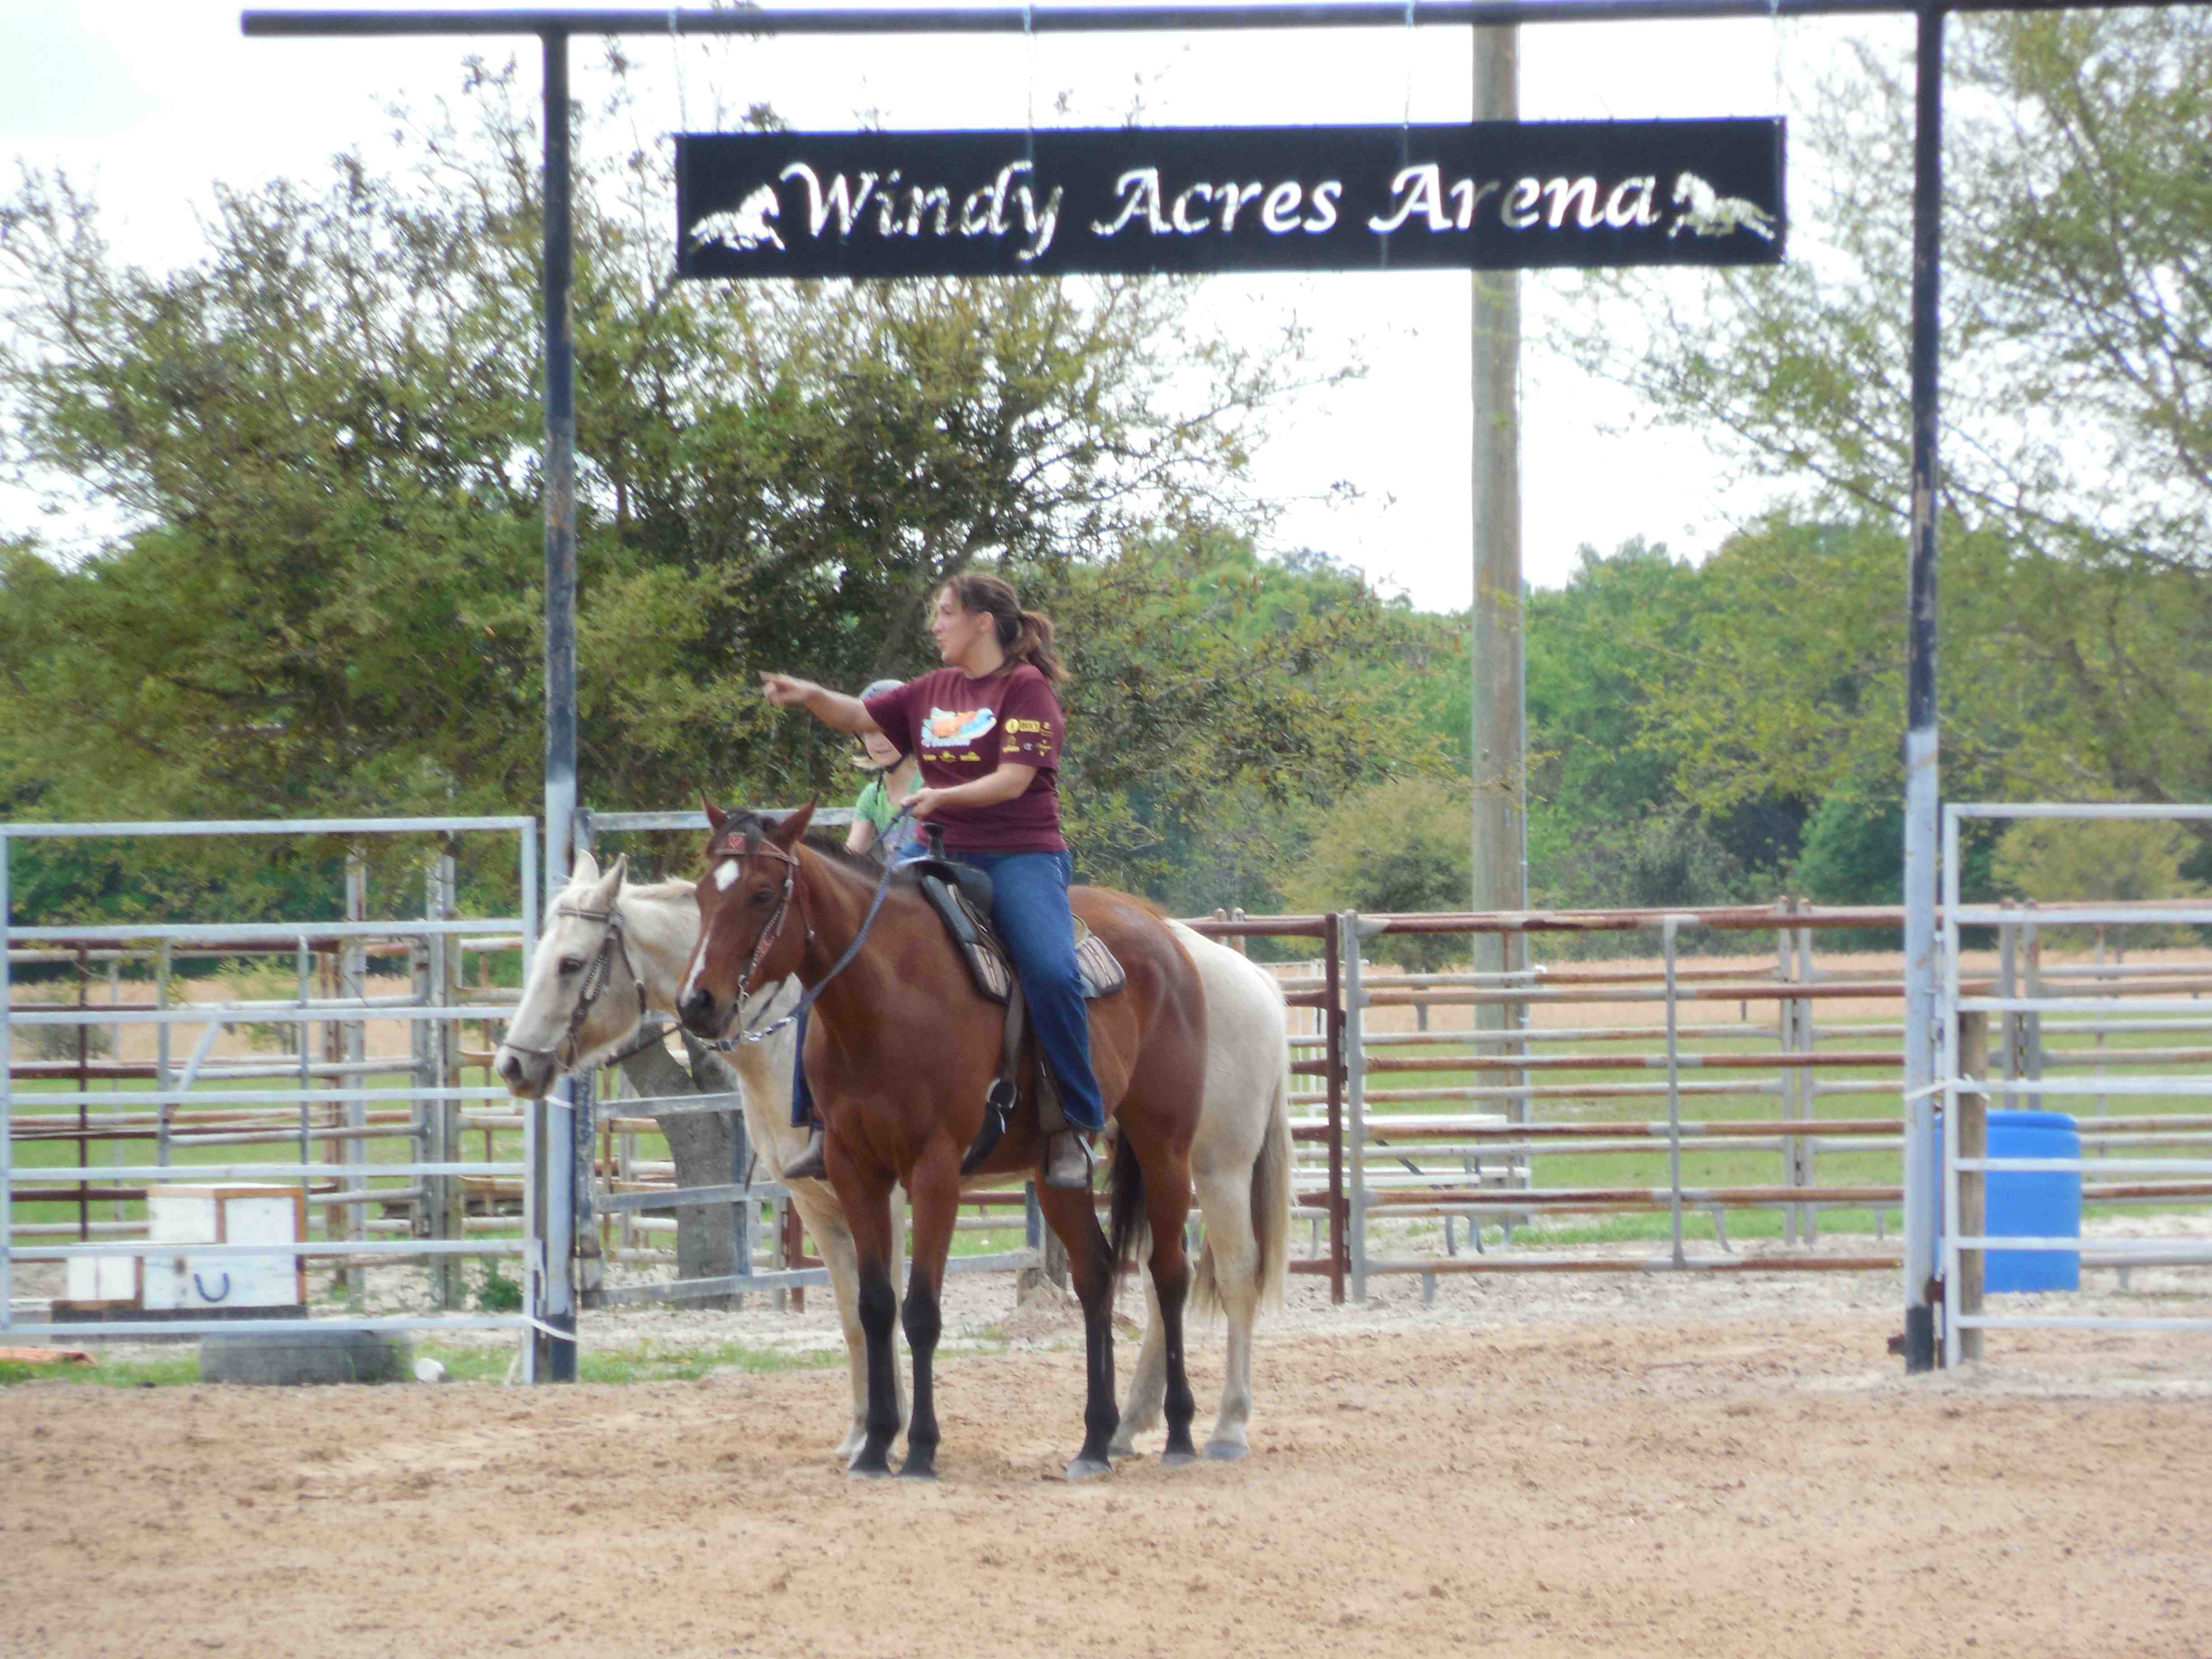 Rodeo arena to be annexed near new Villages of Fruitland Park